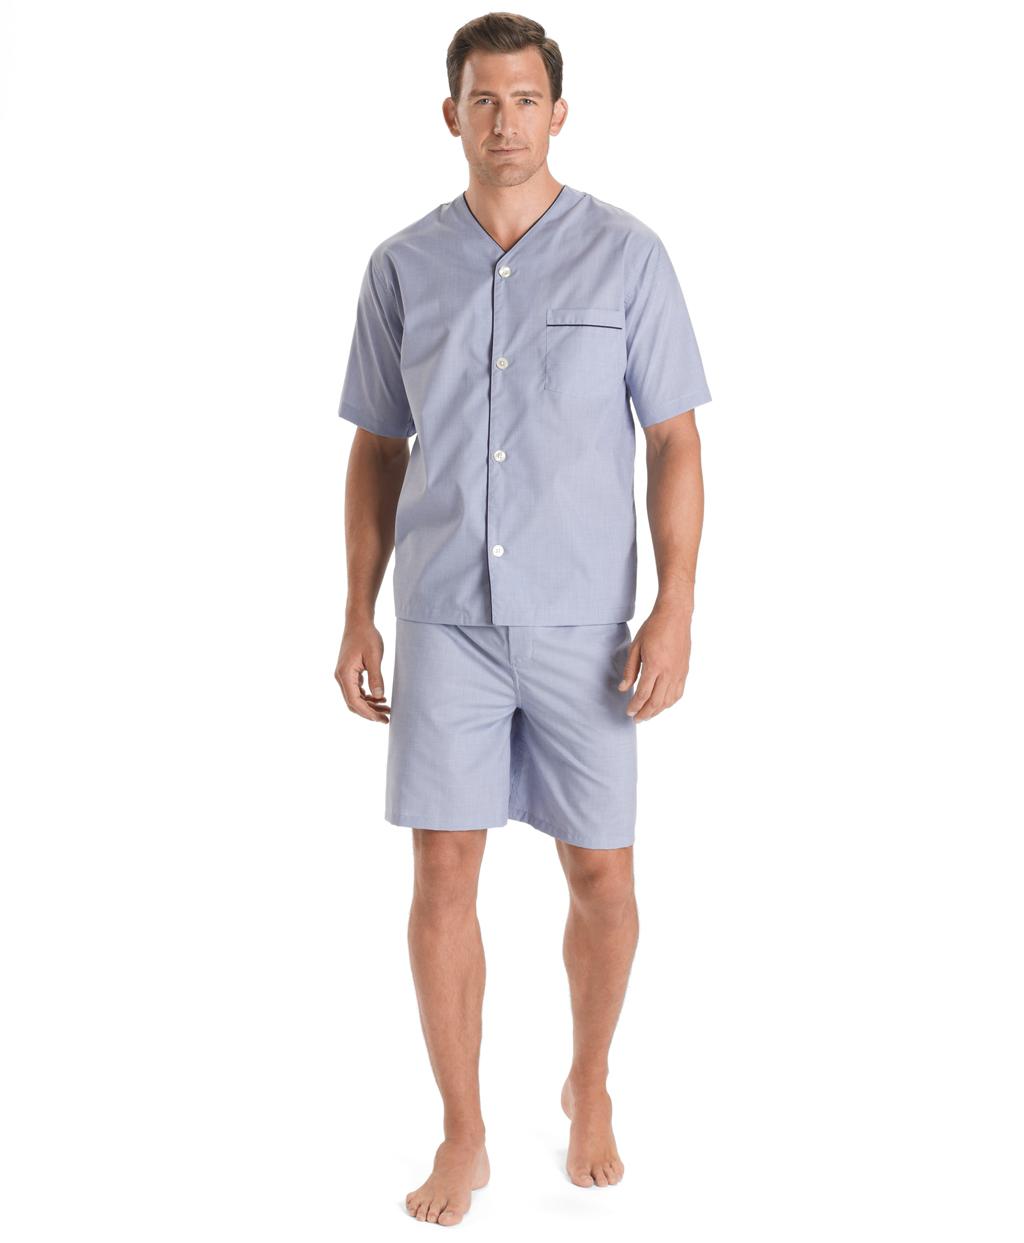 Lyst - Brooks Brothers Wrinkle-resistant Short Pajamas in Blue for Men